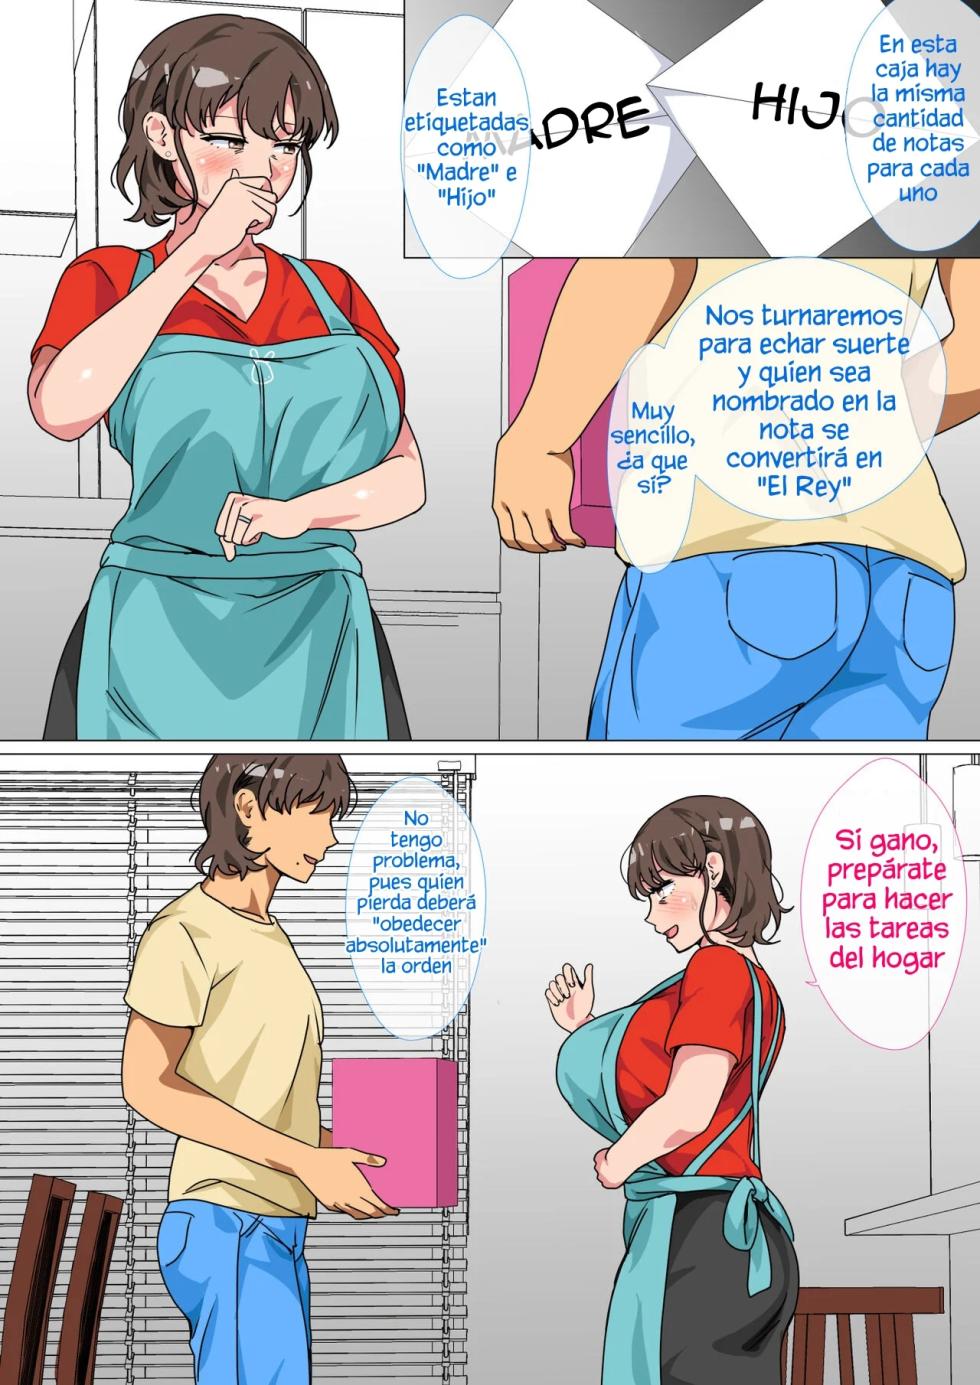 [Circle Spice] Ousama Game no Meirei de Haha to Sex Shita Hanashi | I Ordered My Mom to Have Sex with Me in King's Game [Spanish][PlipPlop] - Page 8